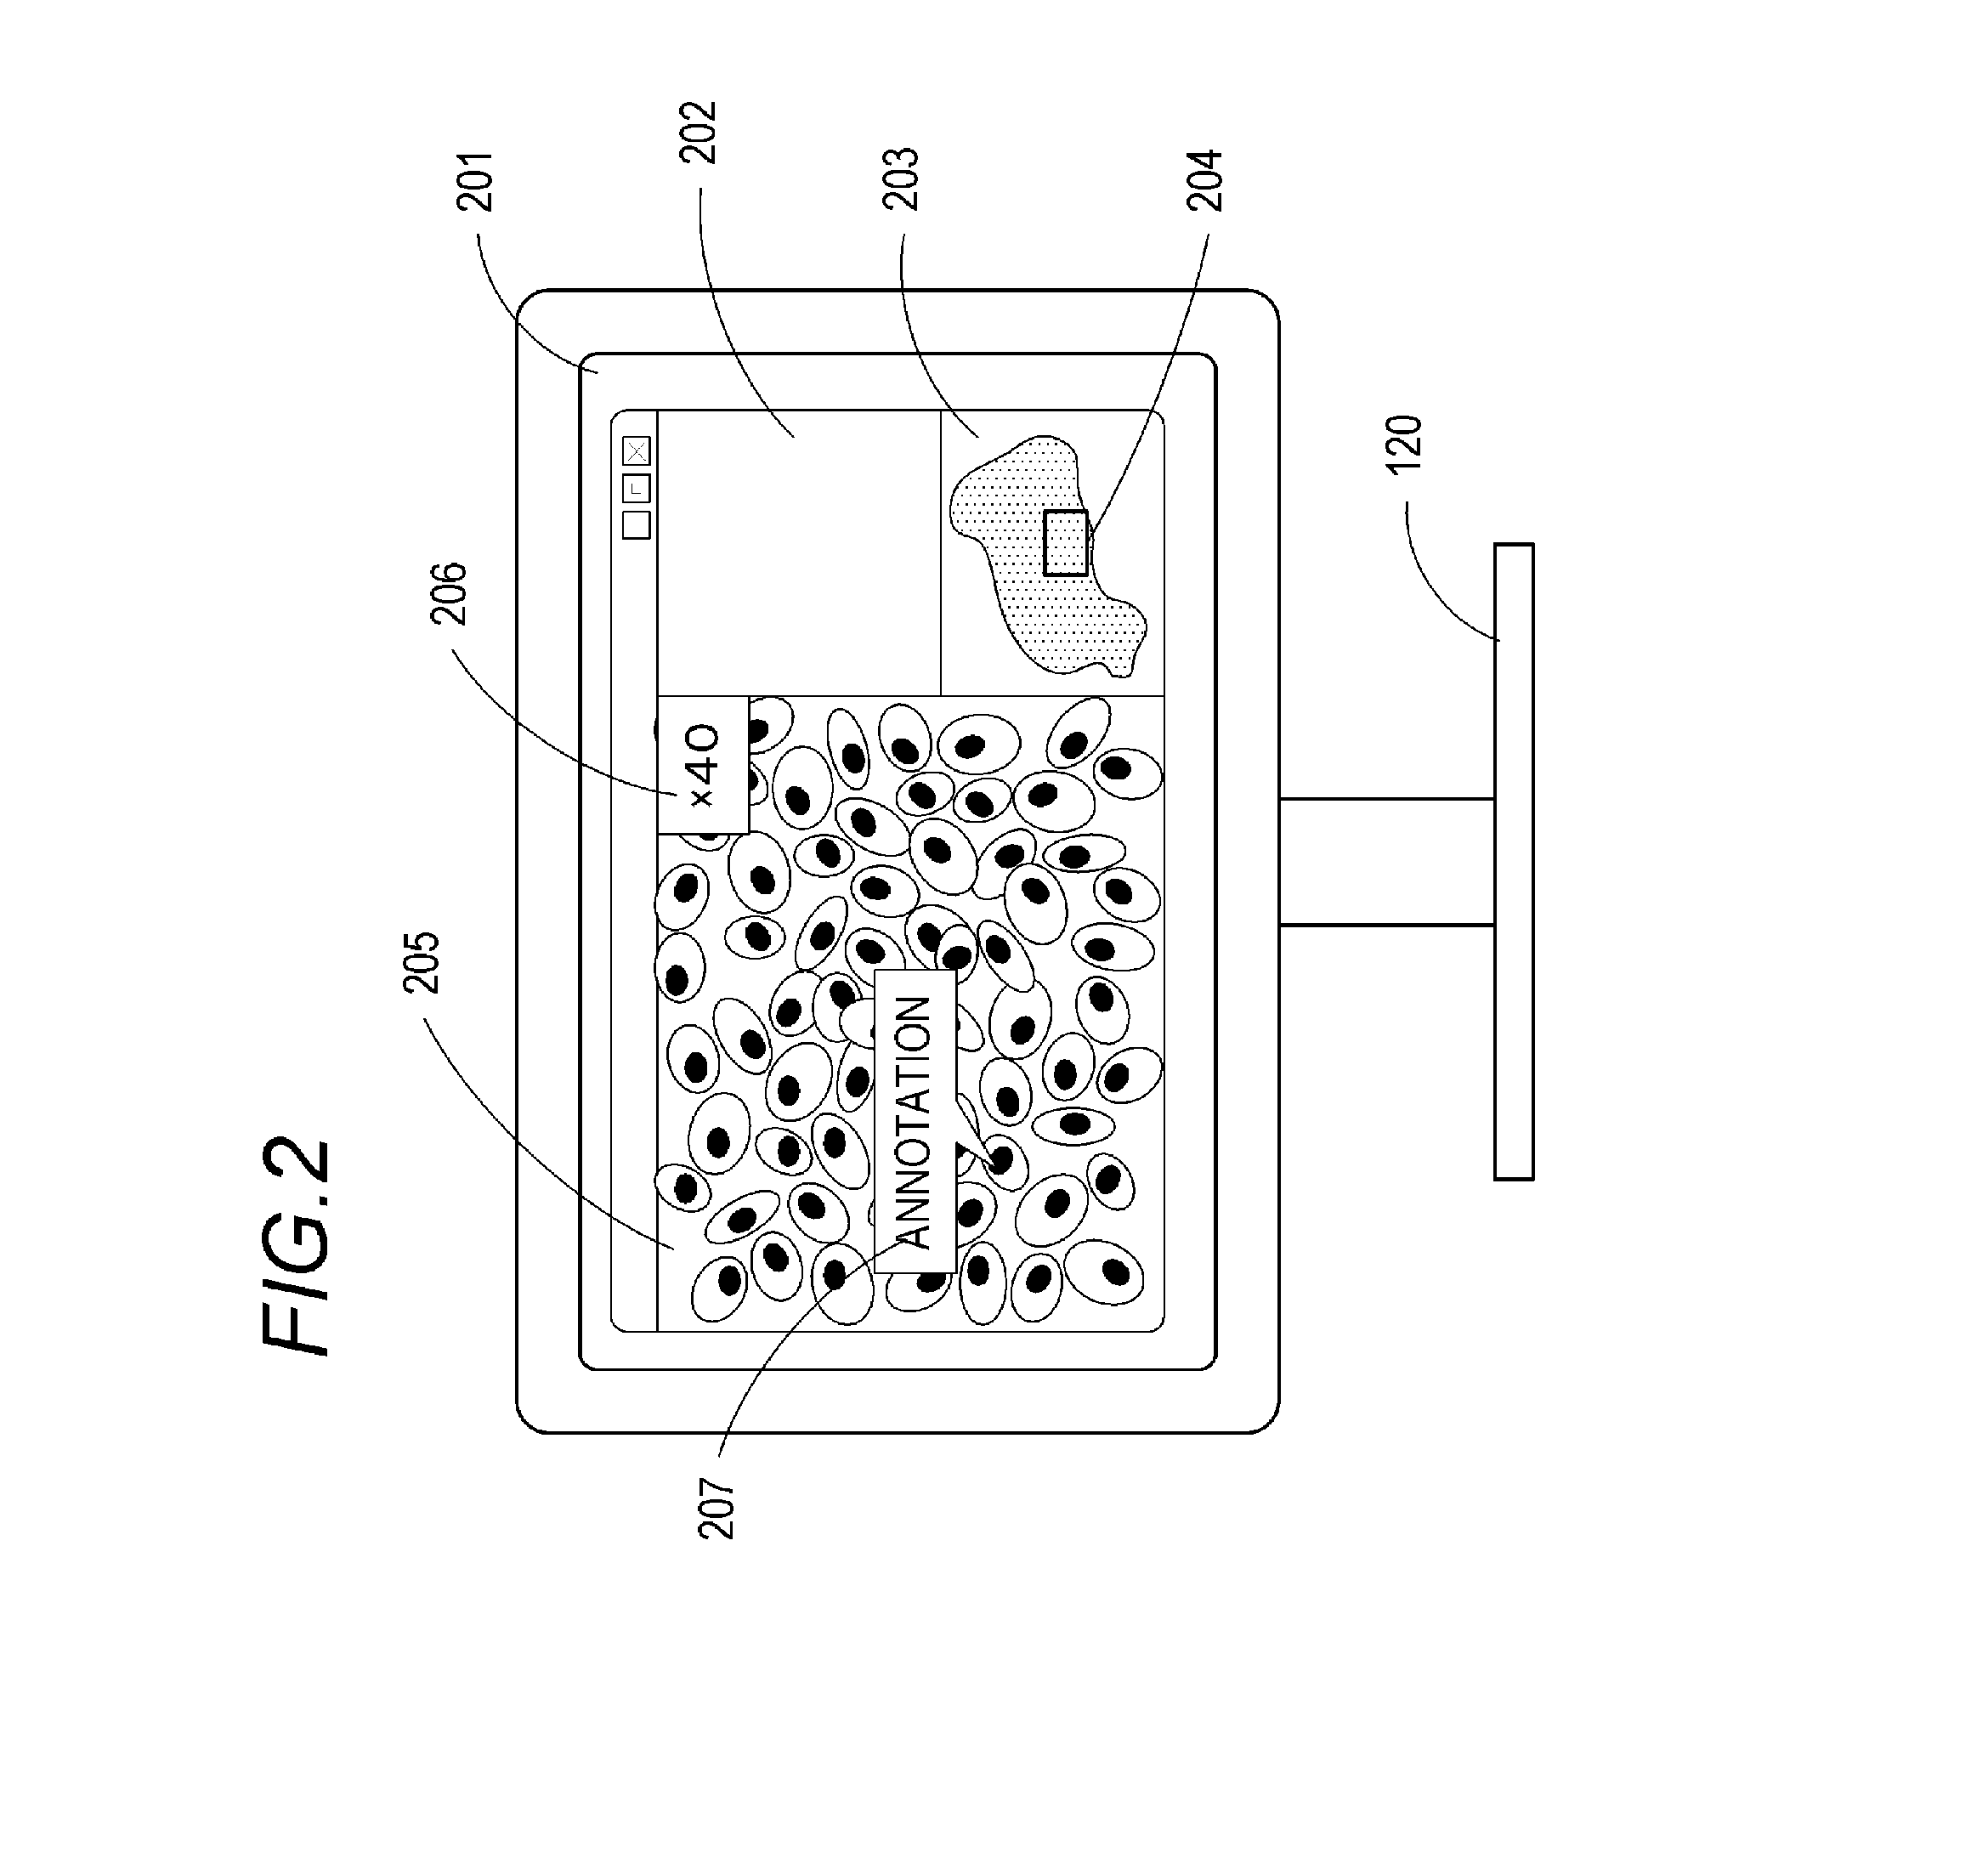 Image generating apparatus and method for controlling the same